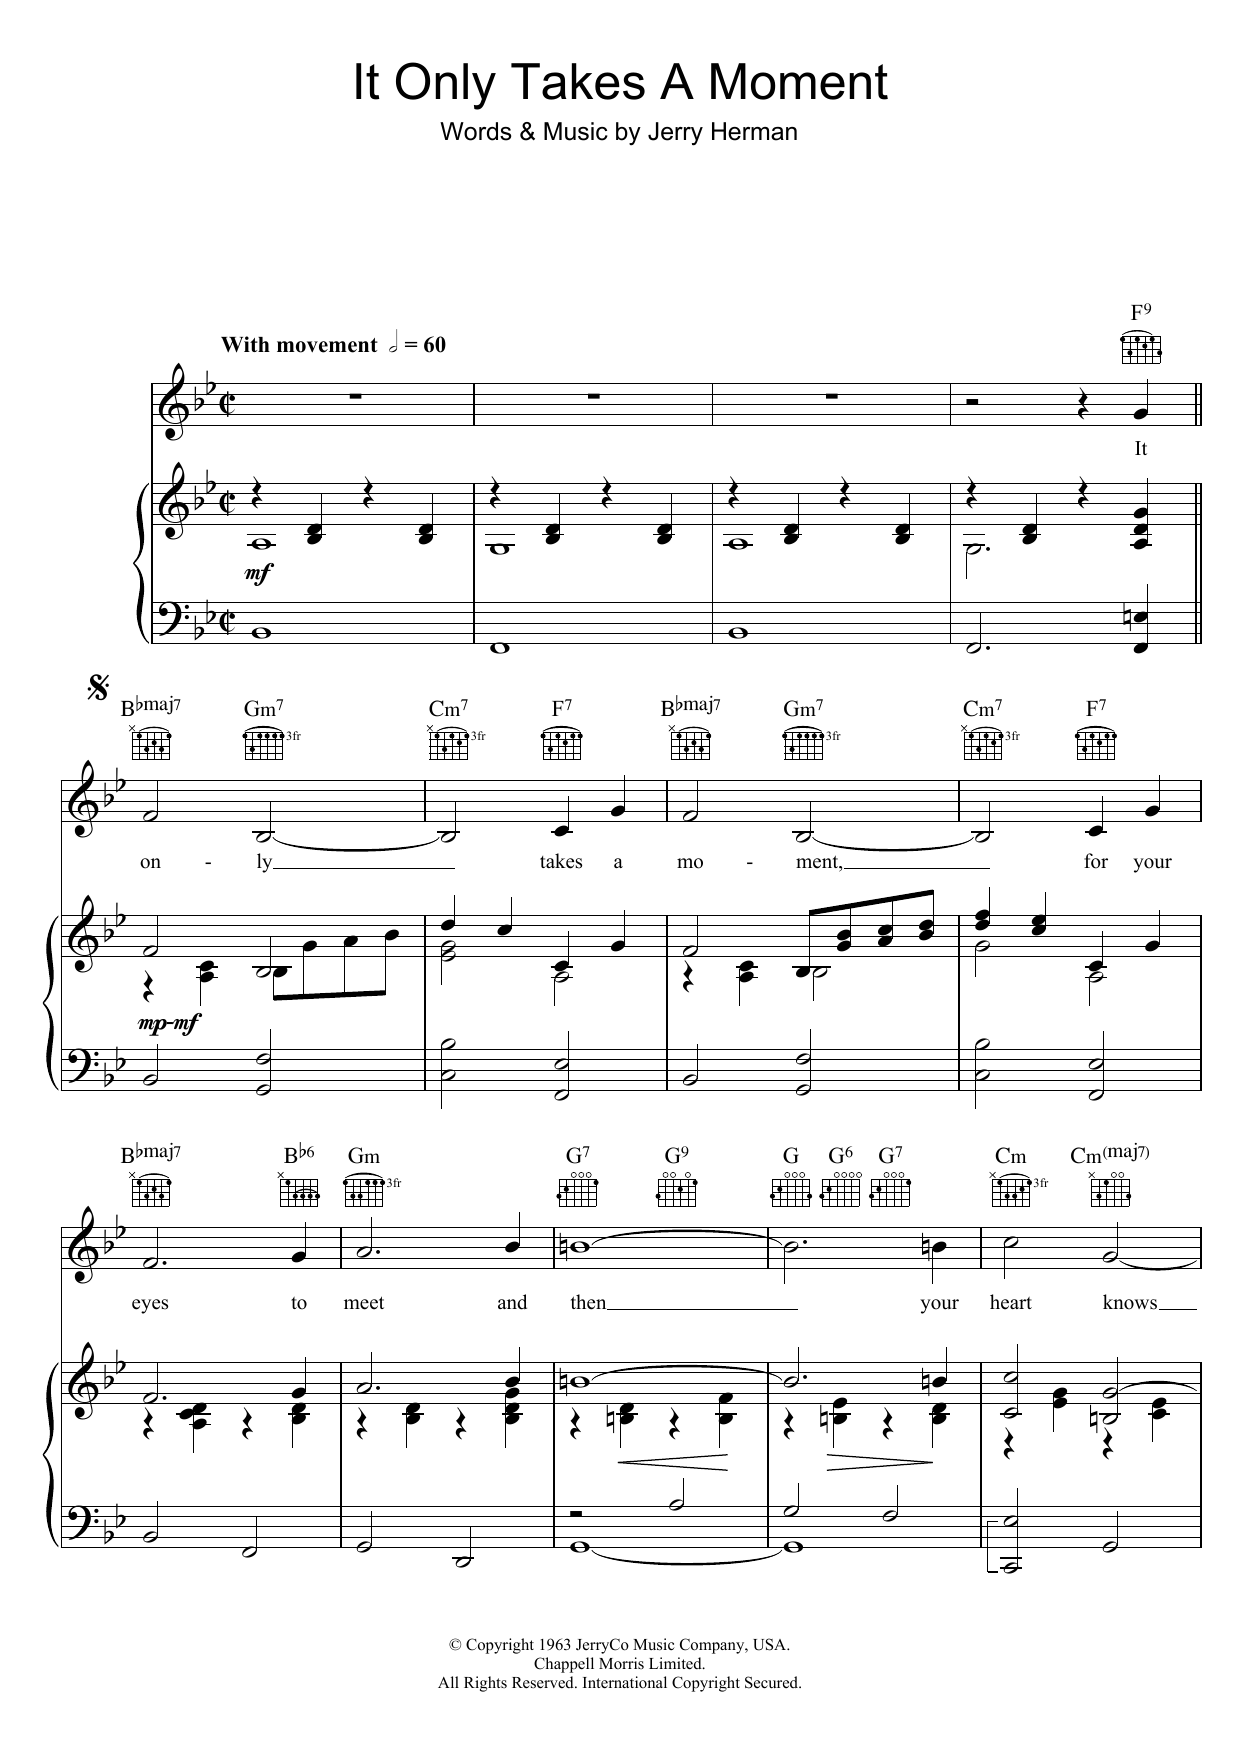 It Only Takes A Moment (from Hello, Dolly!) sheet music